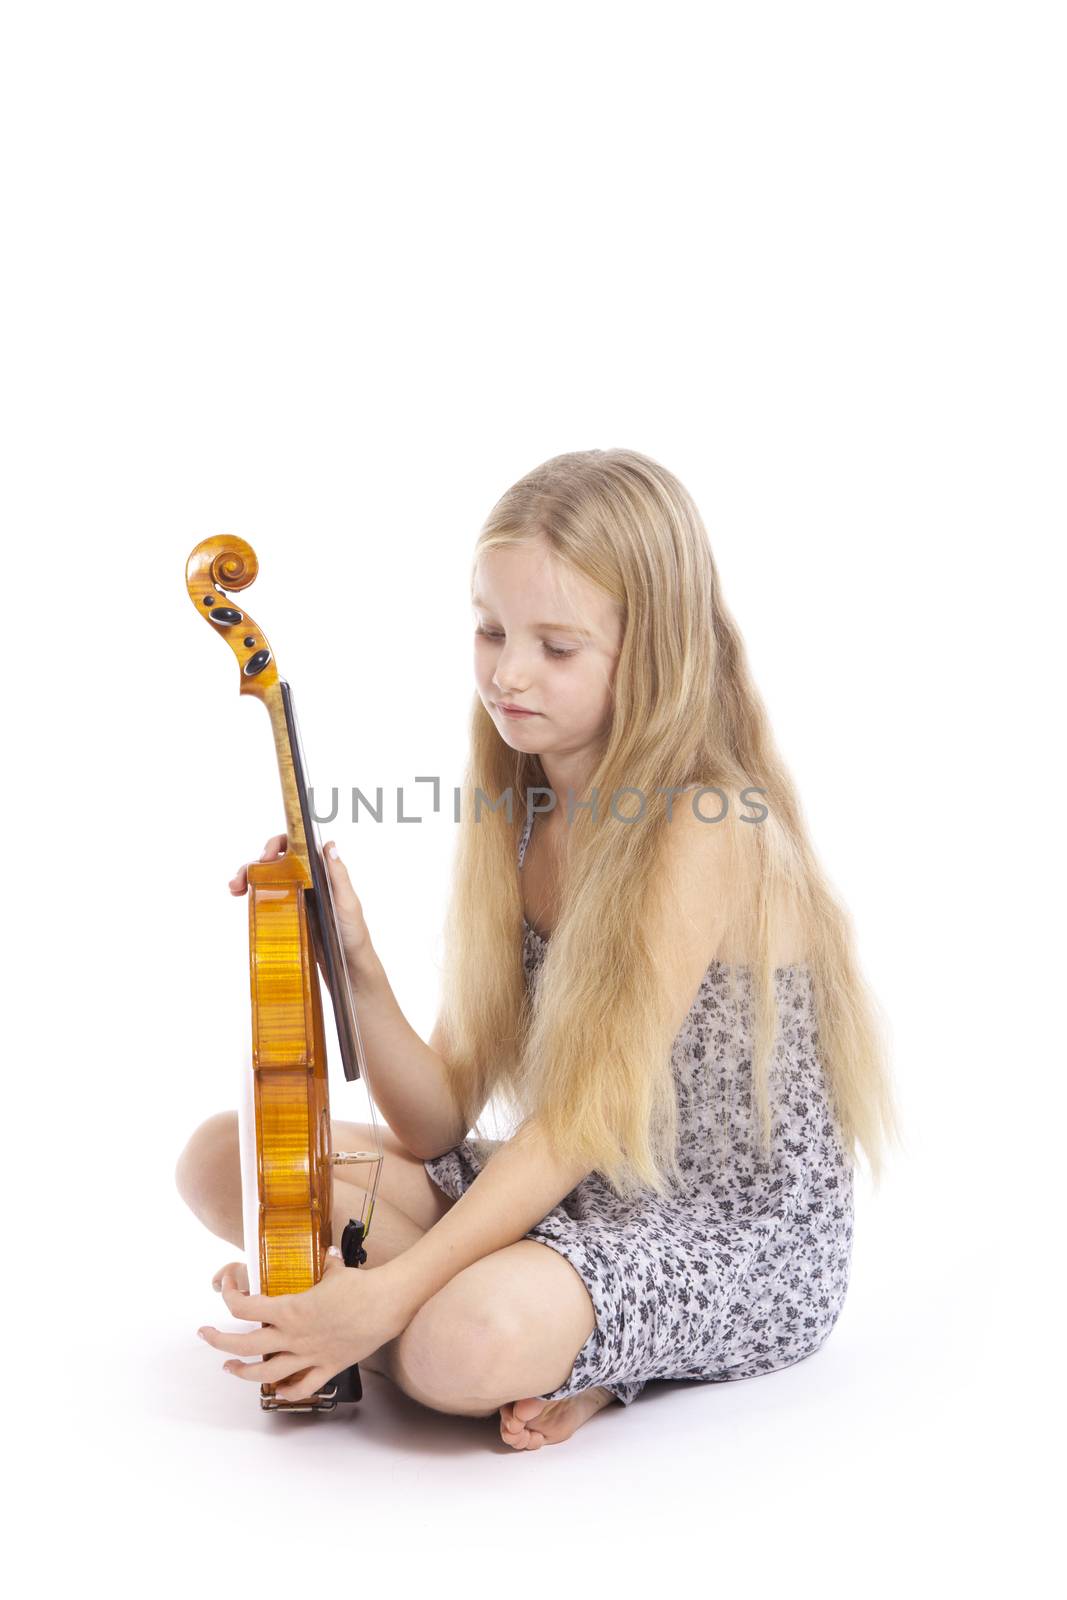 young girl in dress and her violin in studio against white background